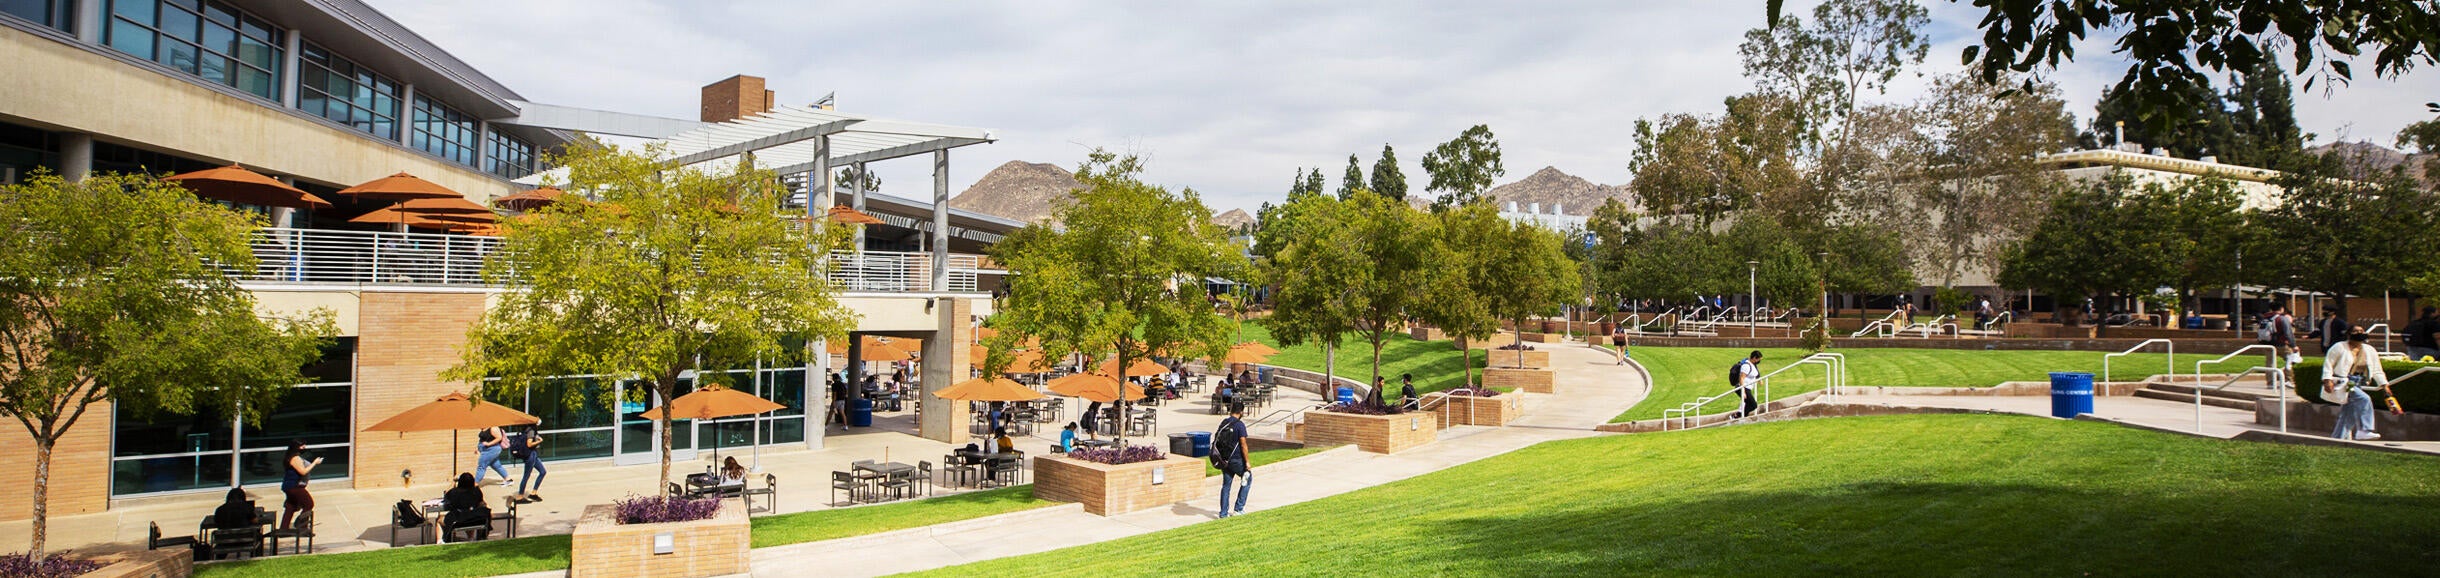 A partly cloudy day on the UC Riverside campus with the Highlander Union Building (HUB) in the background and students sitting at umbrella-covered tables in the HUB plaza.